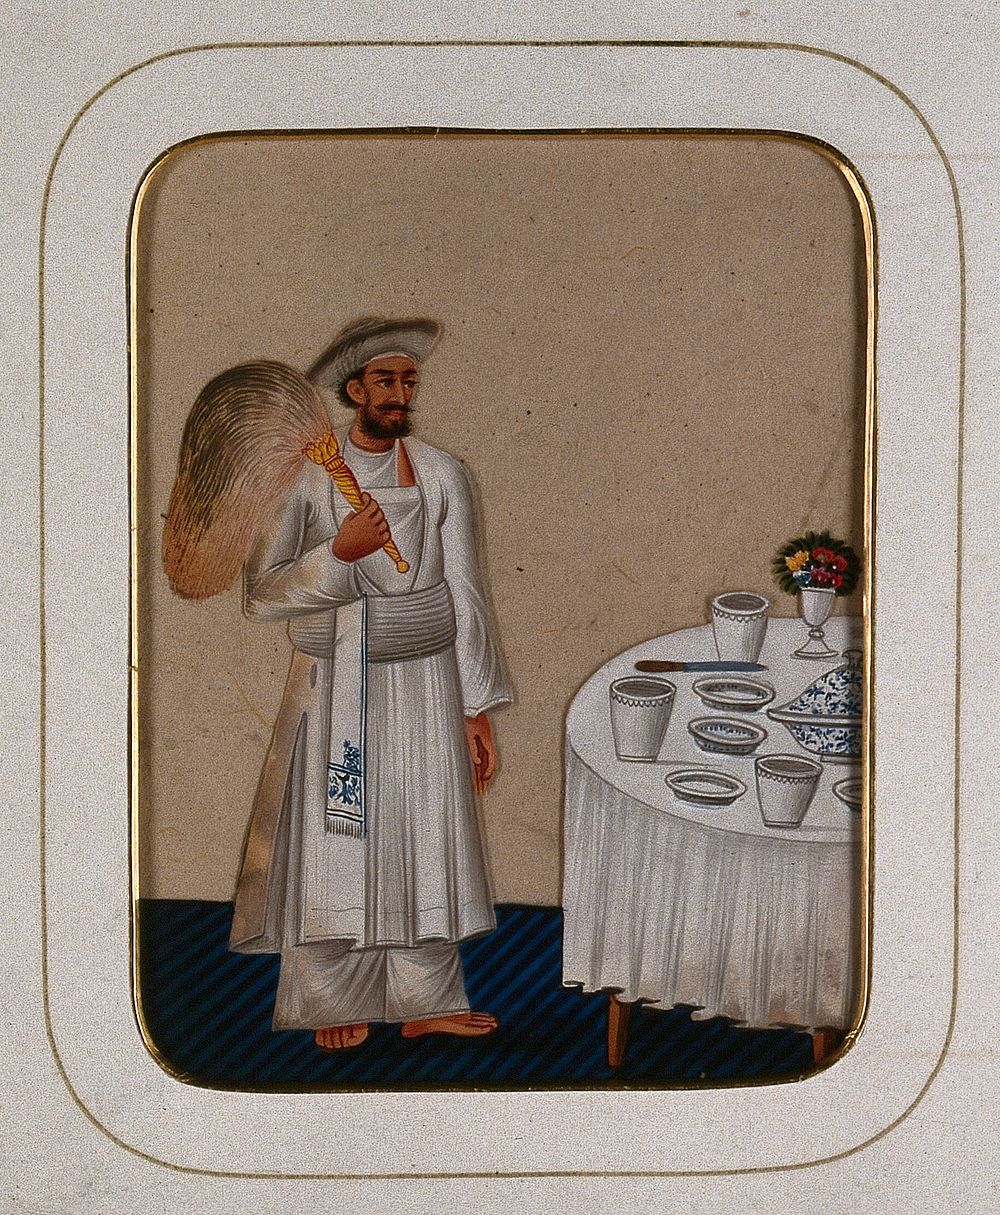 A servant standing next to a dining table, holding a fly whisk. Gouache painting on mica by an Indian artist.